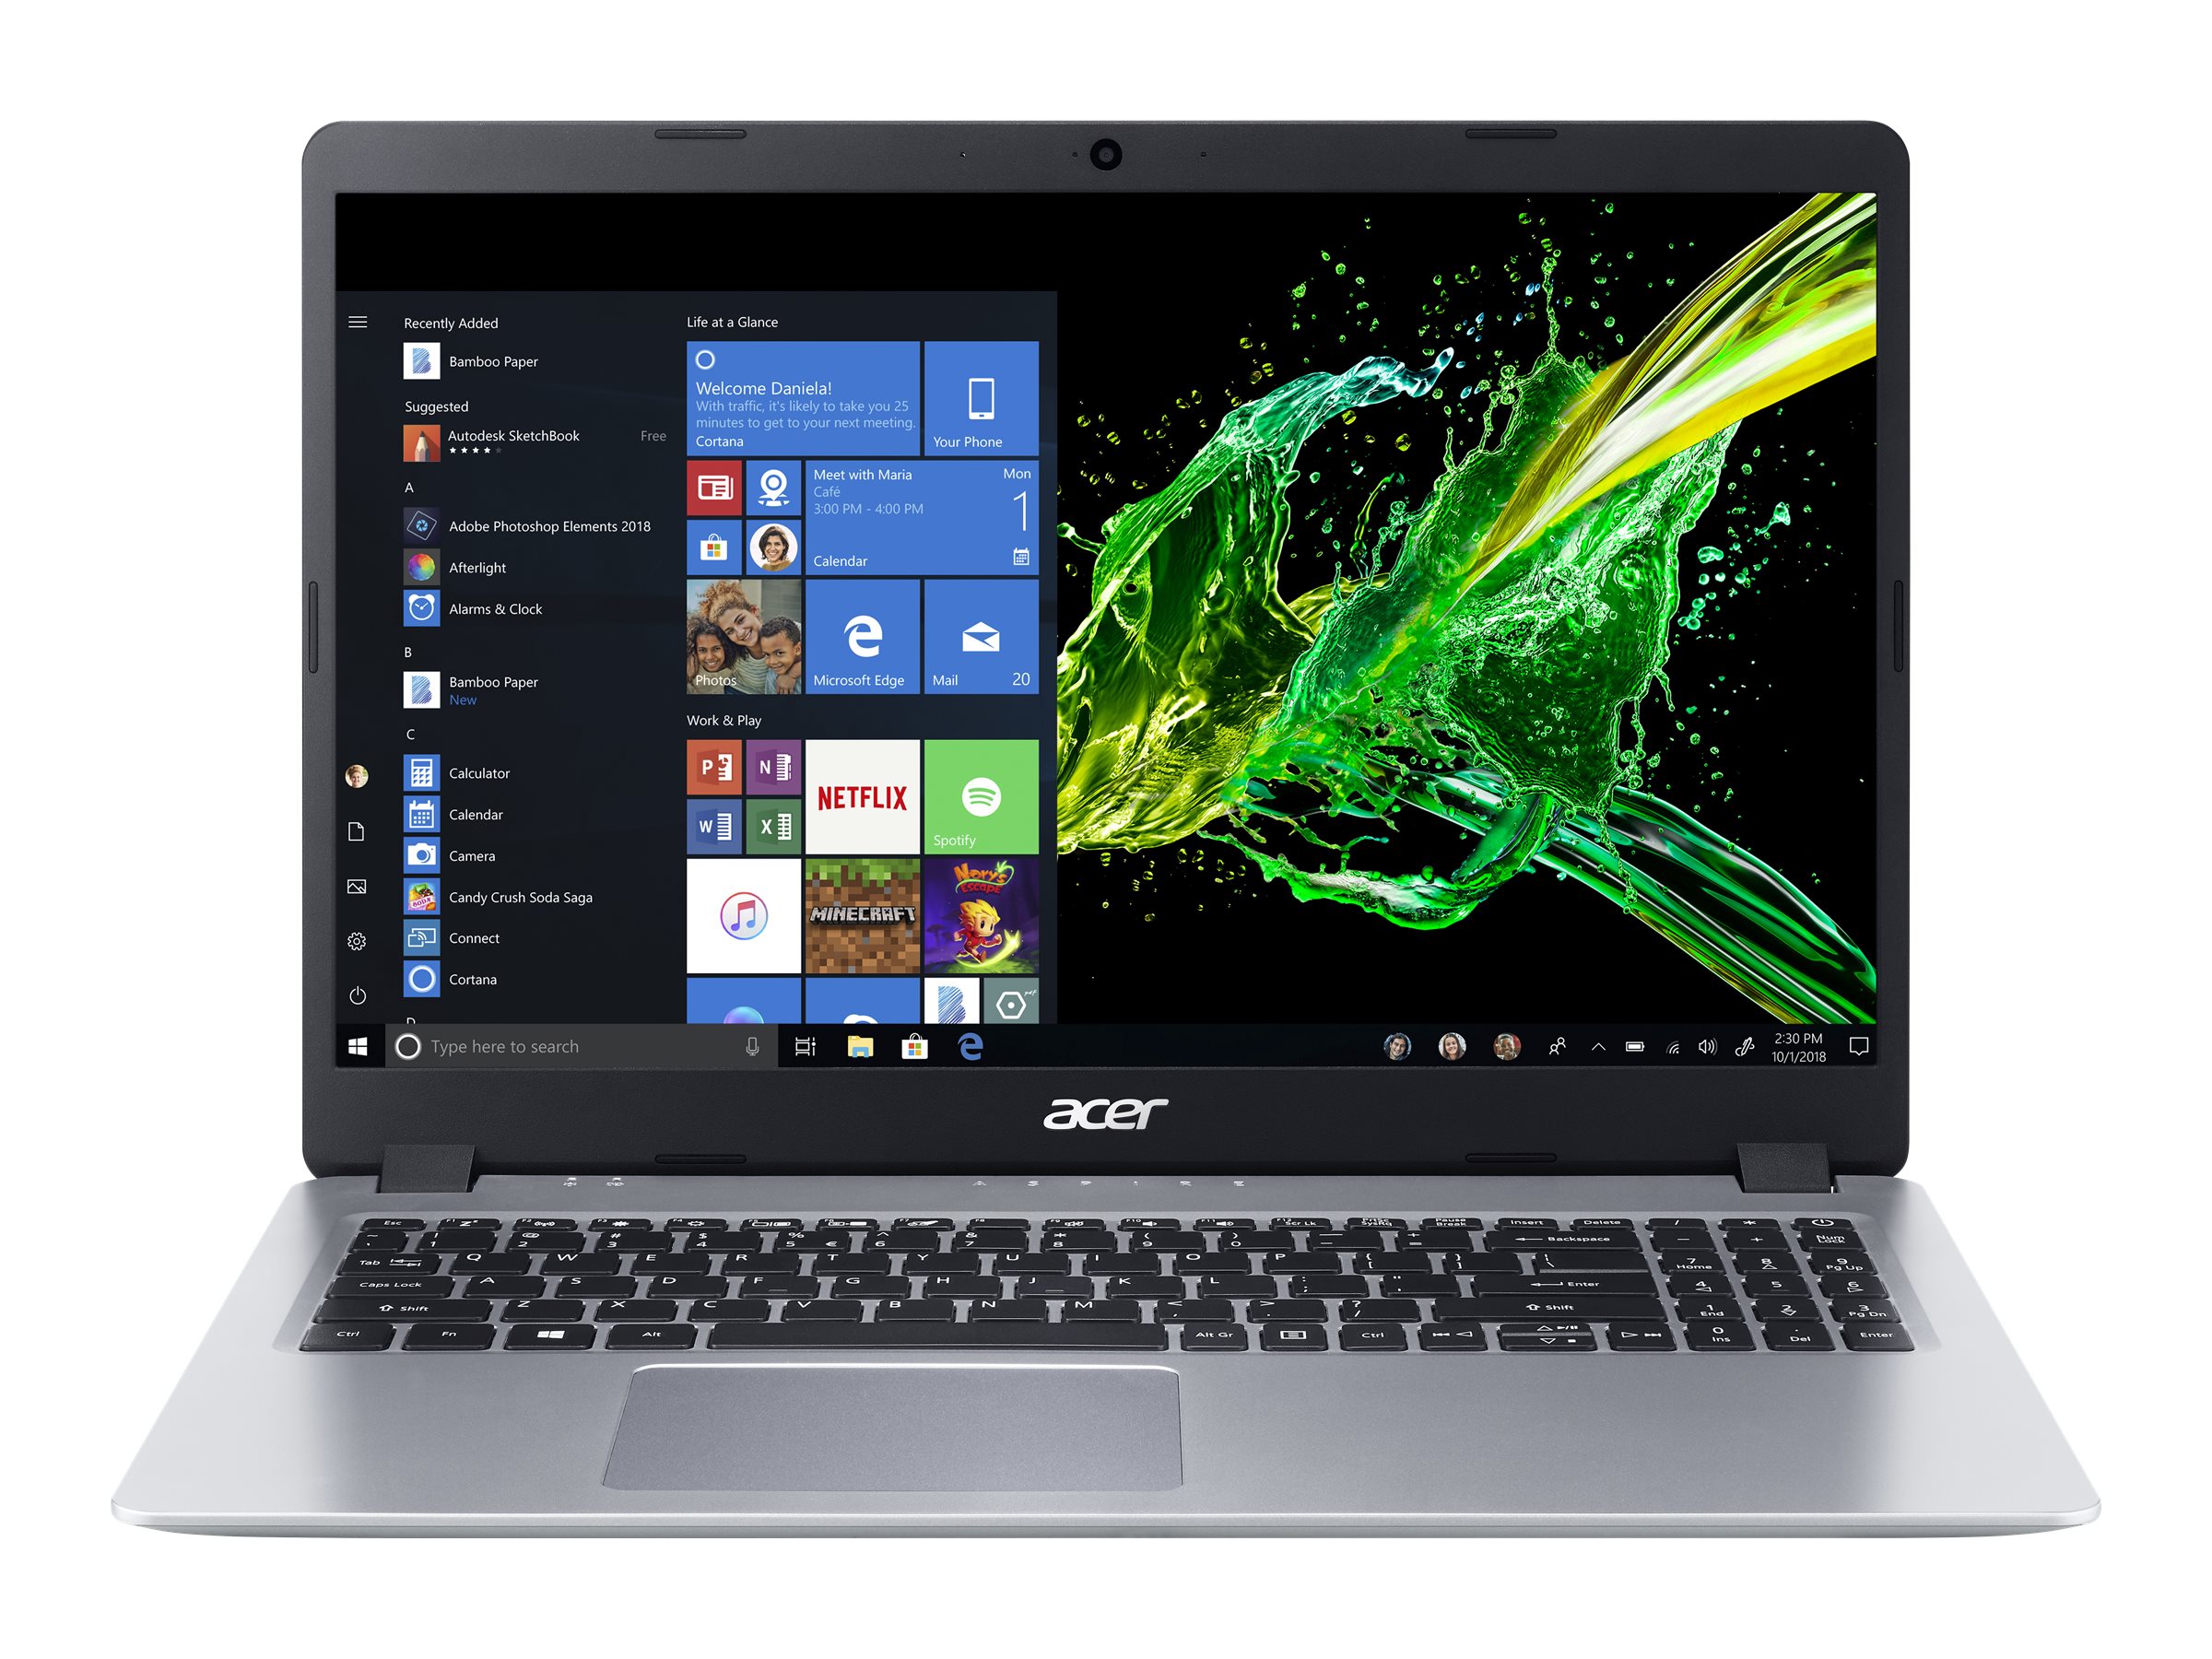 Acer A515-43-R19L 15.6 in. Aspire 5 Slim Laptop Full HD IPS Display Laptop - Silver - image 3 of 7